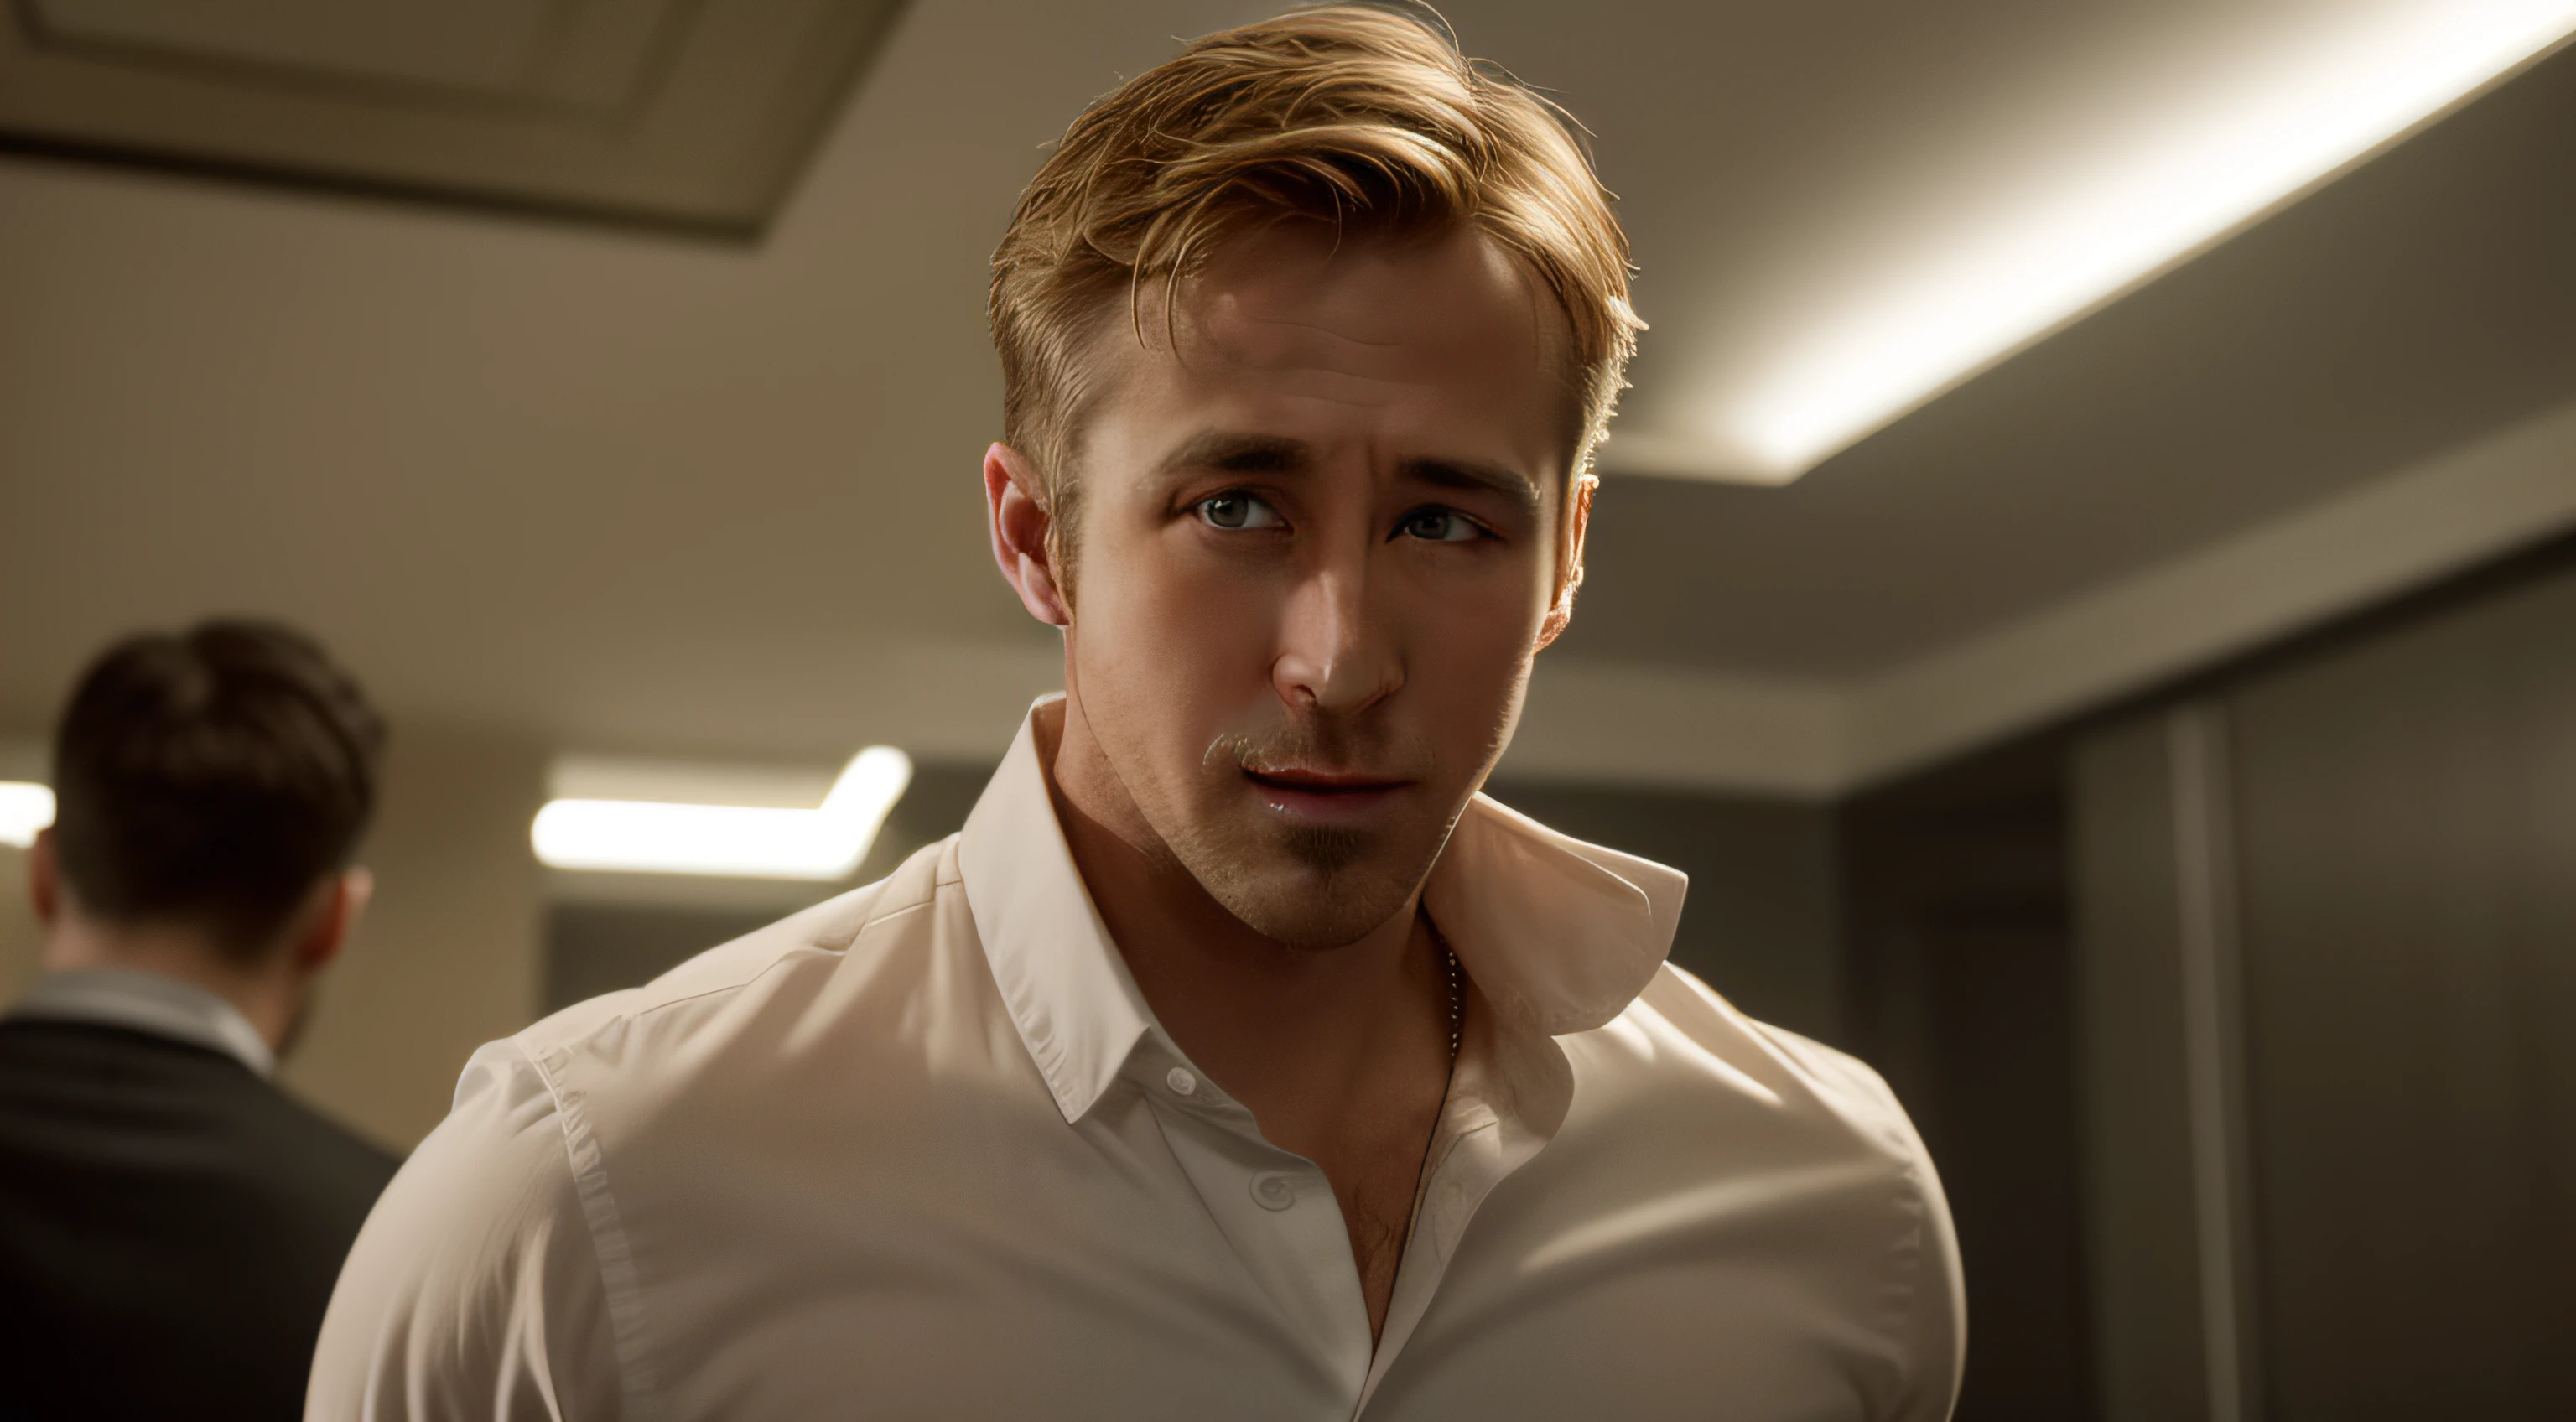 In the scene, Ryan Gosling, the talented actor, captivates the audience with his magnetic presence and charismatic charm. His expressive eyes convey a range of emotions, from intense focus to playful wit. The lighting accentuates his chiseled features, adding a touch of allure and mystery to his persona. Whether he's in the midst of a heartfelt conversation or engaging in a thrilling action sequence, Gosling's versatility shines through, captivating viewers and leaving a lasting impression. This evocative description invites readers to envision Gosling's presence on screen, capturing the essence of his talent and on-screen charisma.